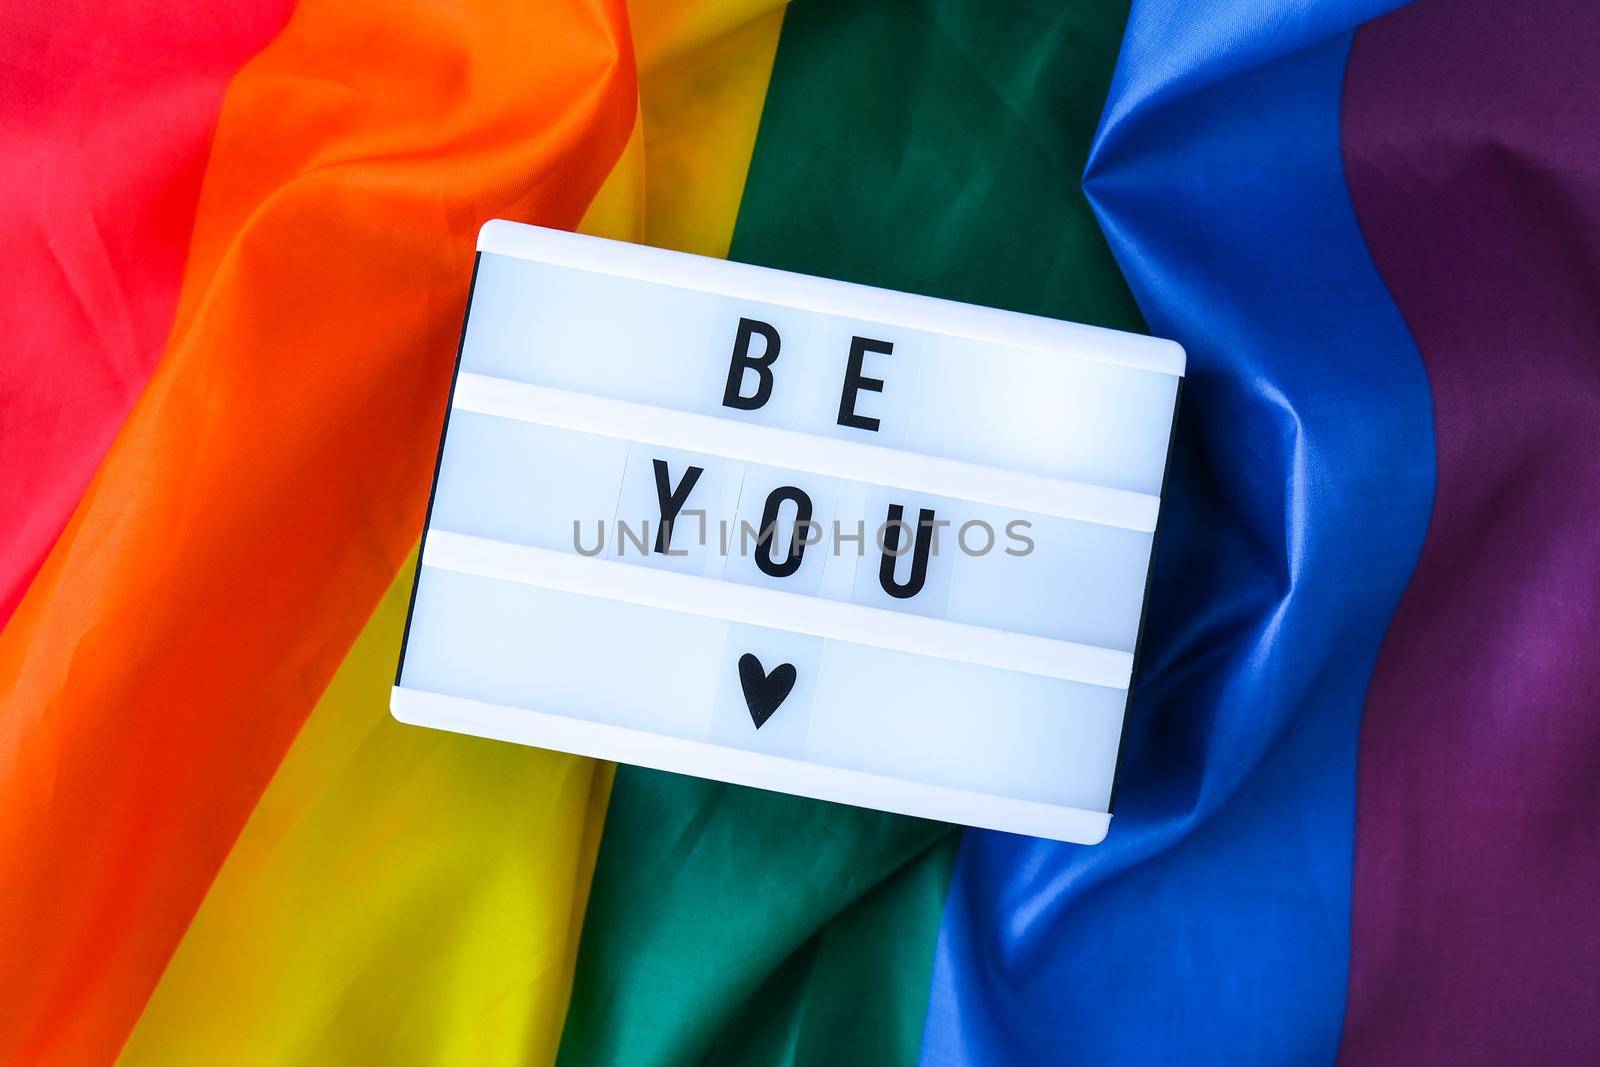 Rainbow flag with lightbox and text BE YOU. Rainbow lgbtq flag made from silk material. Symbol of LGBTQ pride month. Equal rights. Peace and freedom. Support LGBTQ community